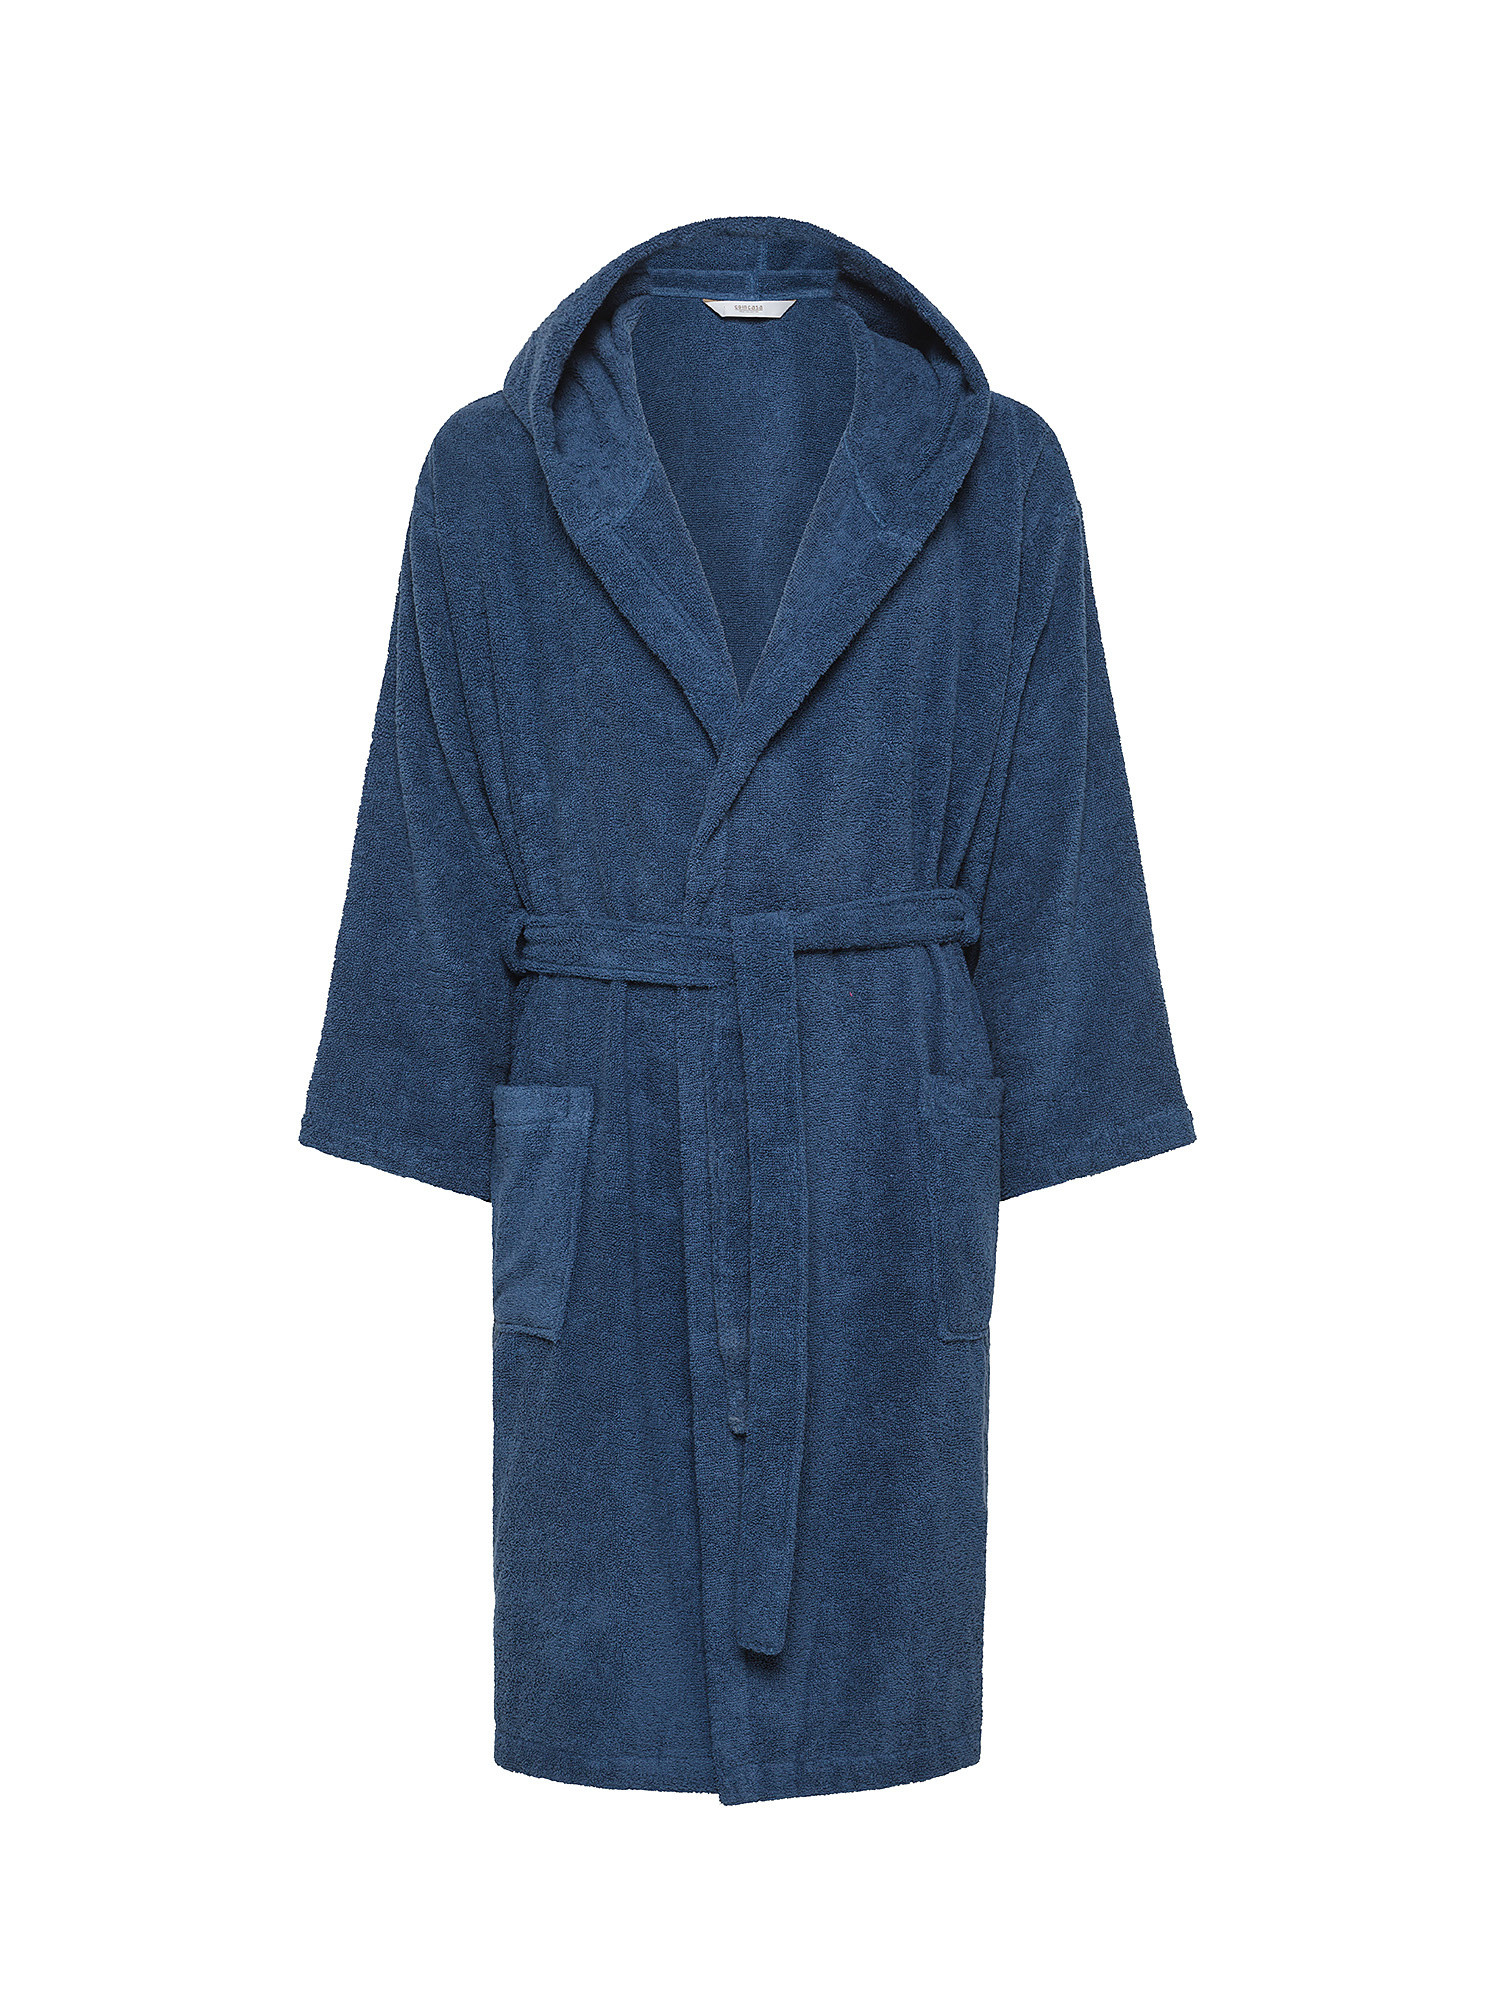 Bathrobe with hood in solid color pure cotton terry, Blue, large image number 0